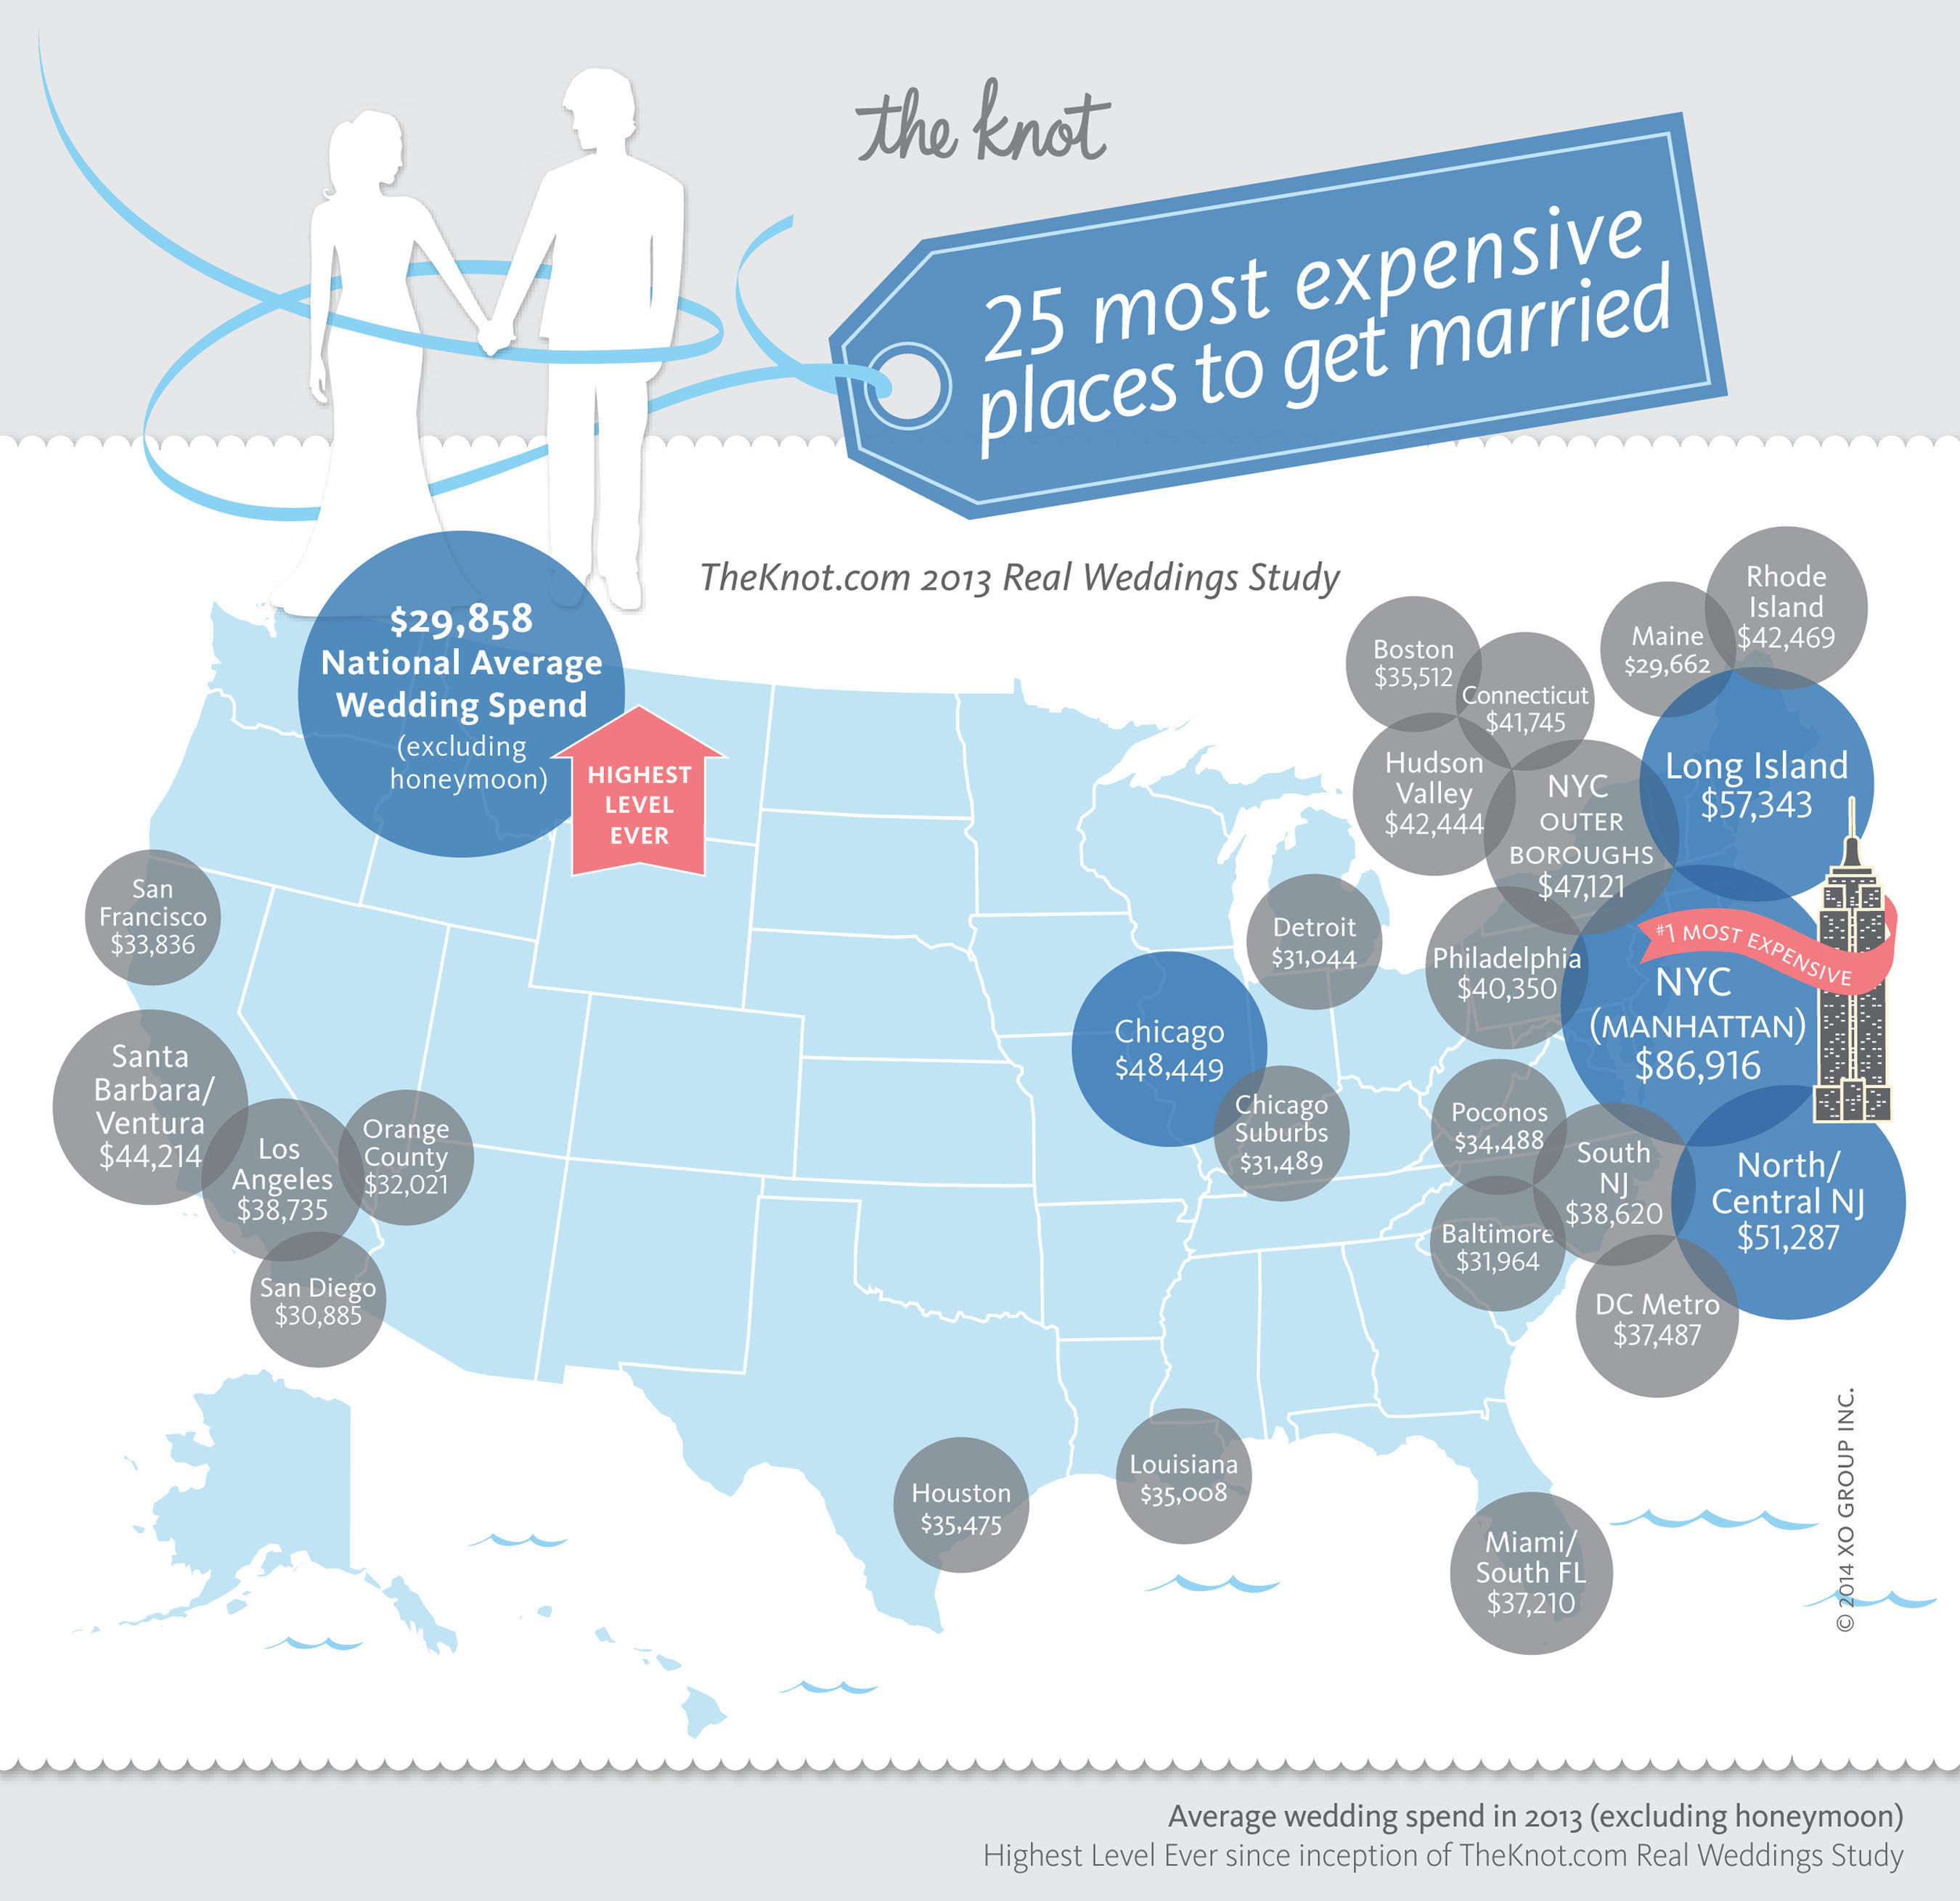 Top Most Expensive Places to Marry in America. (PRNewsFoto/XO Group Inc.) (PRNewsFoto/XO GROUP INC.)